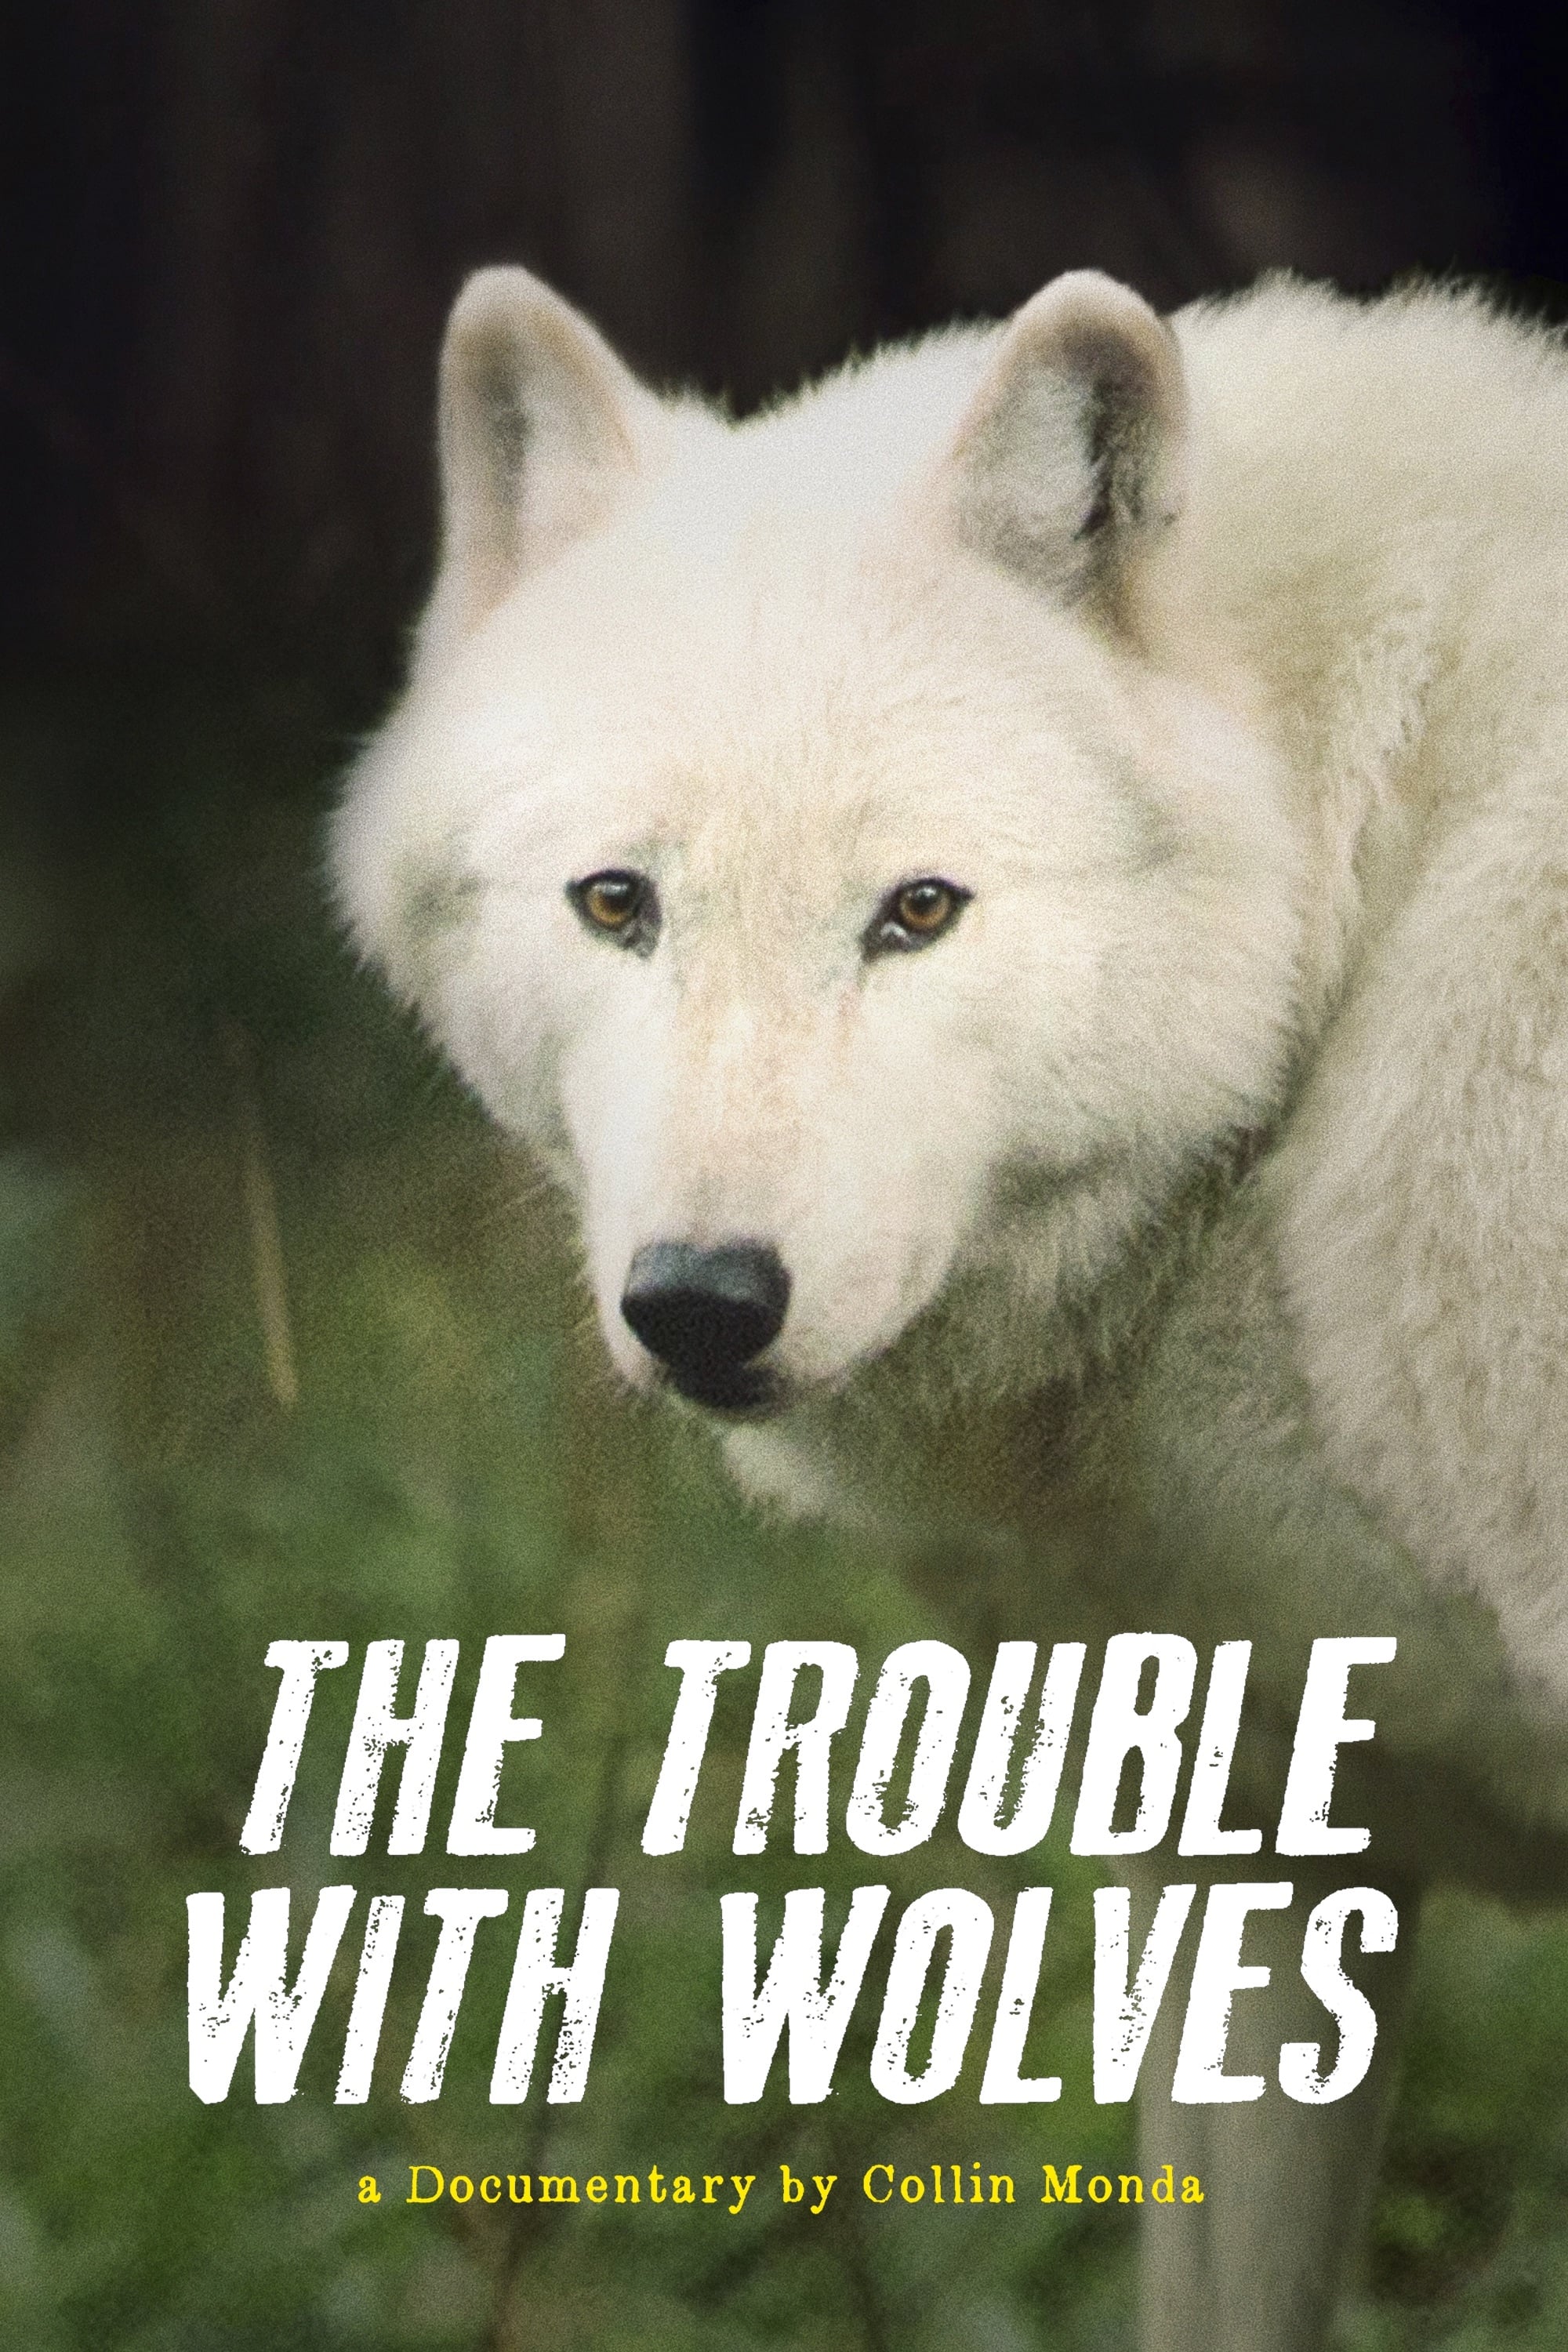 The Trouble with Wolves